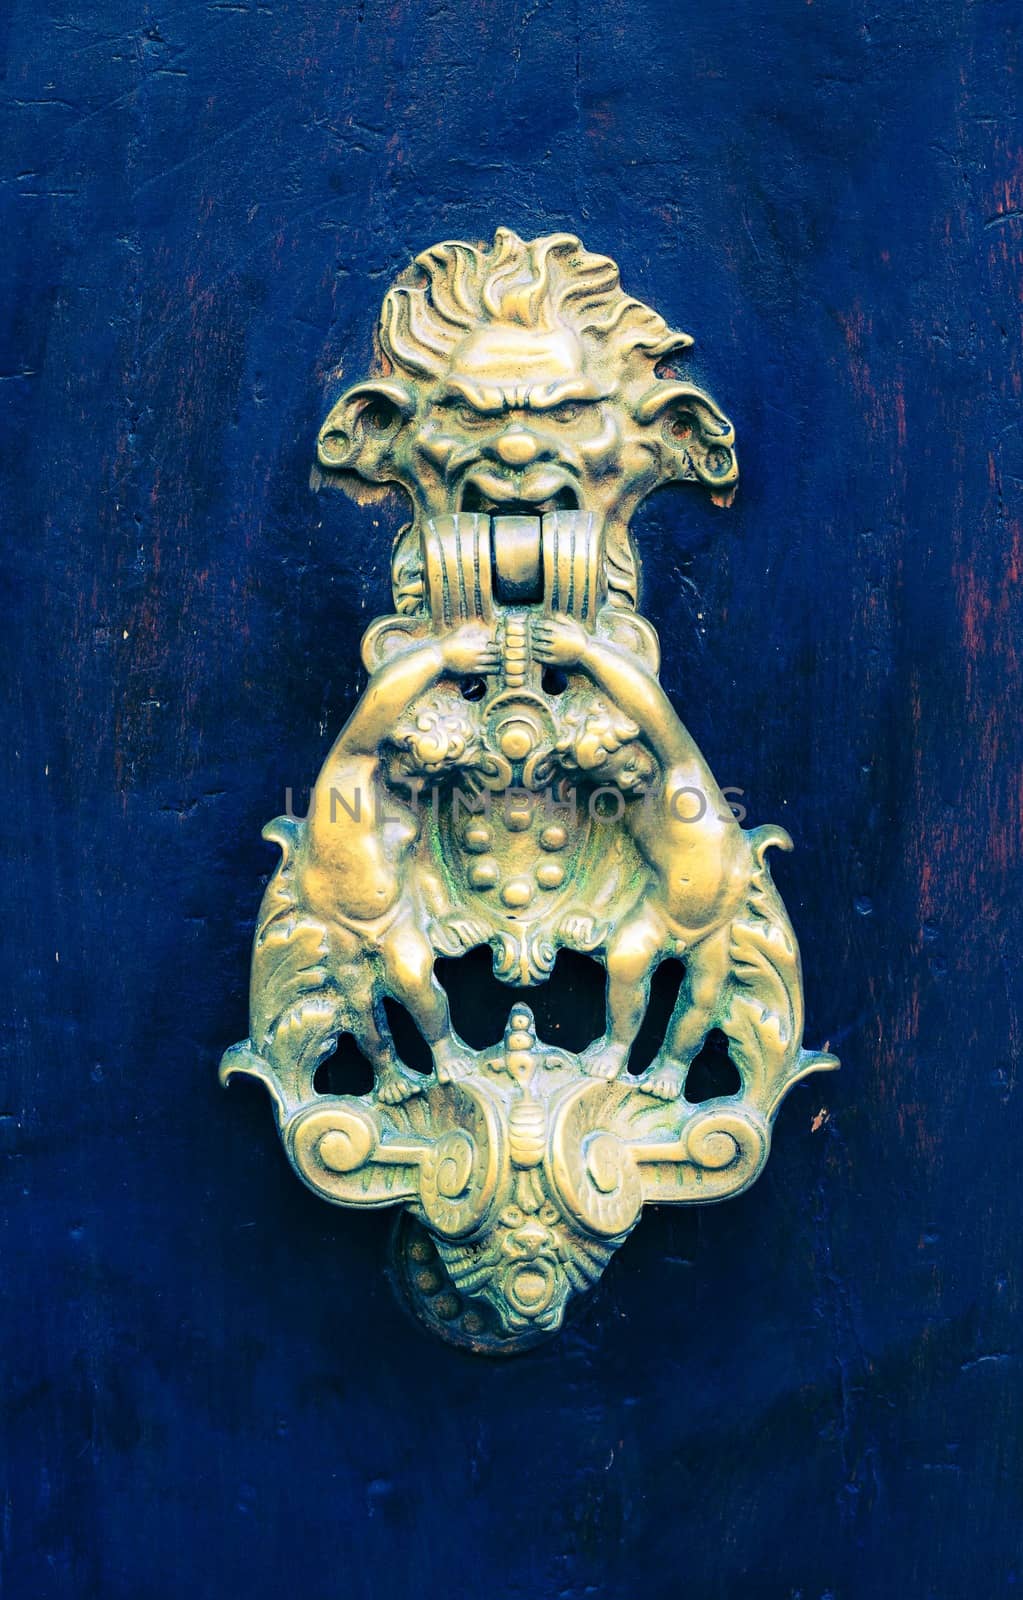 Close-up picture of a door knocker on blue background.